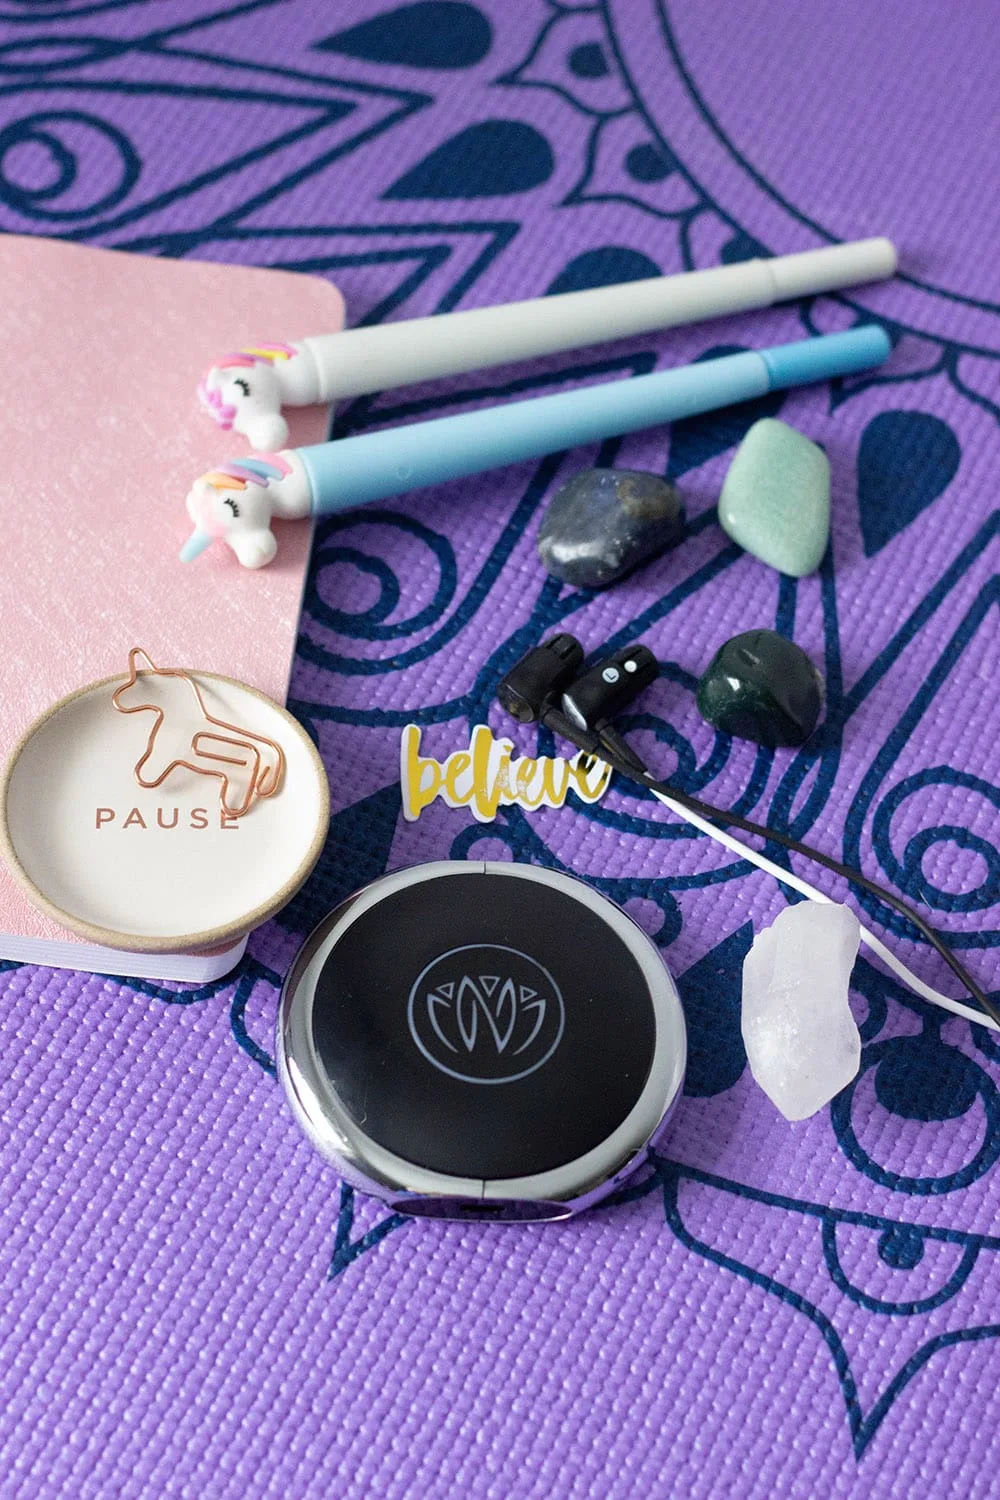 Relaxing items on a purple yoga mat.